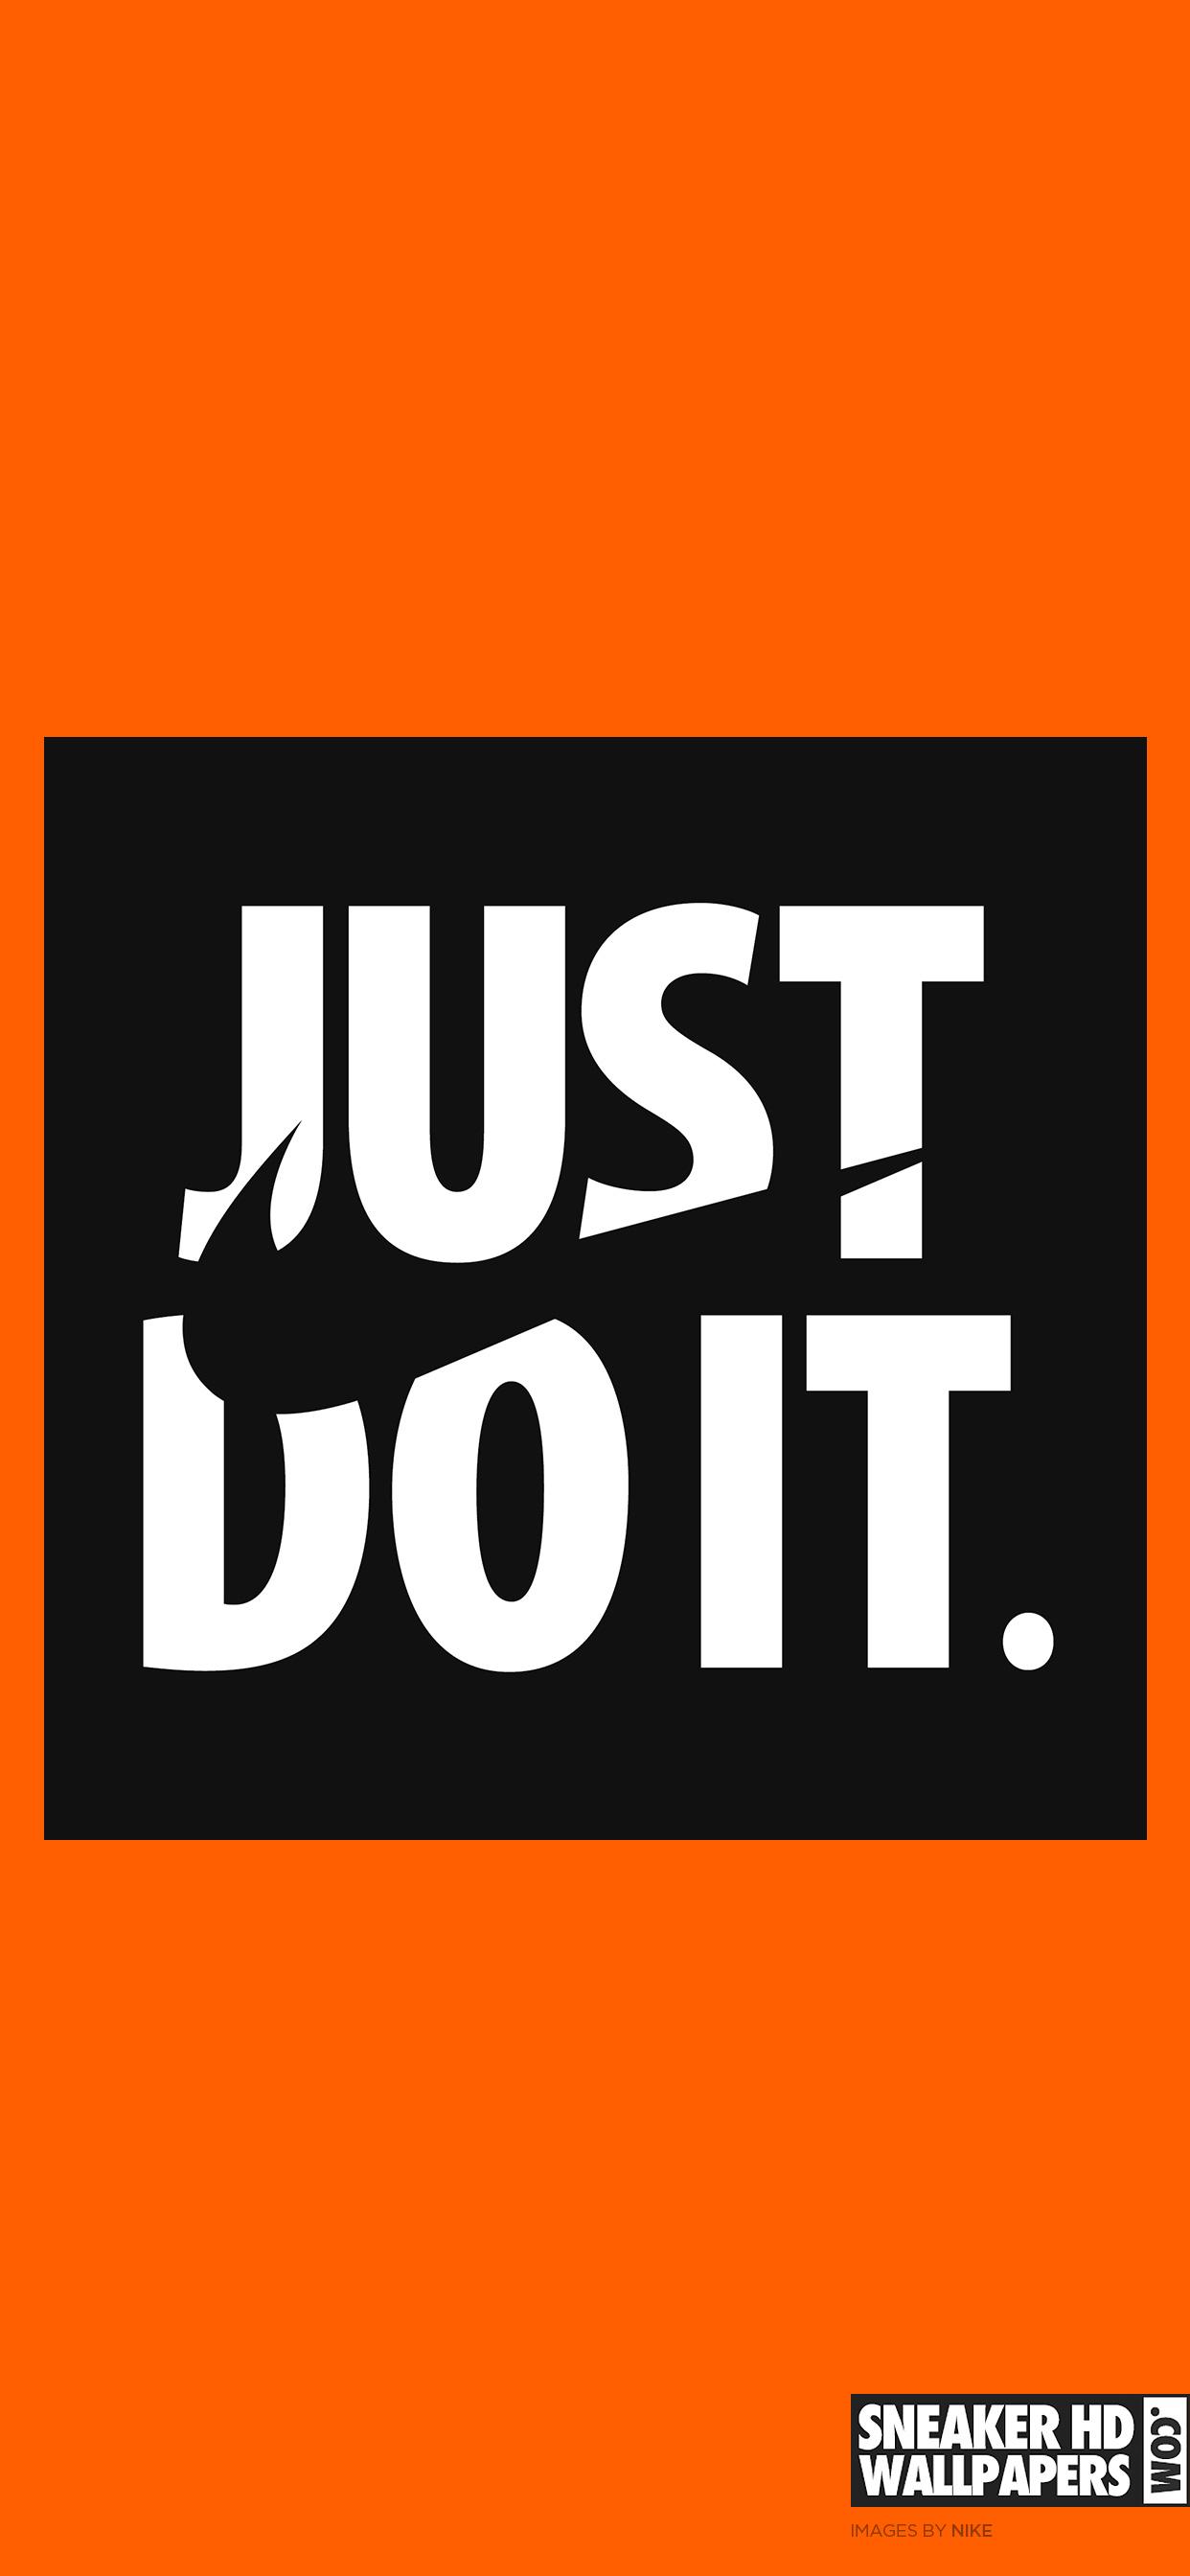 Nike Just Do It Wallpaper Iphone X Off 79 Www Sirda In